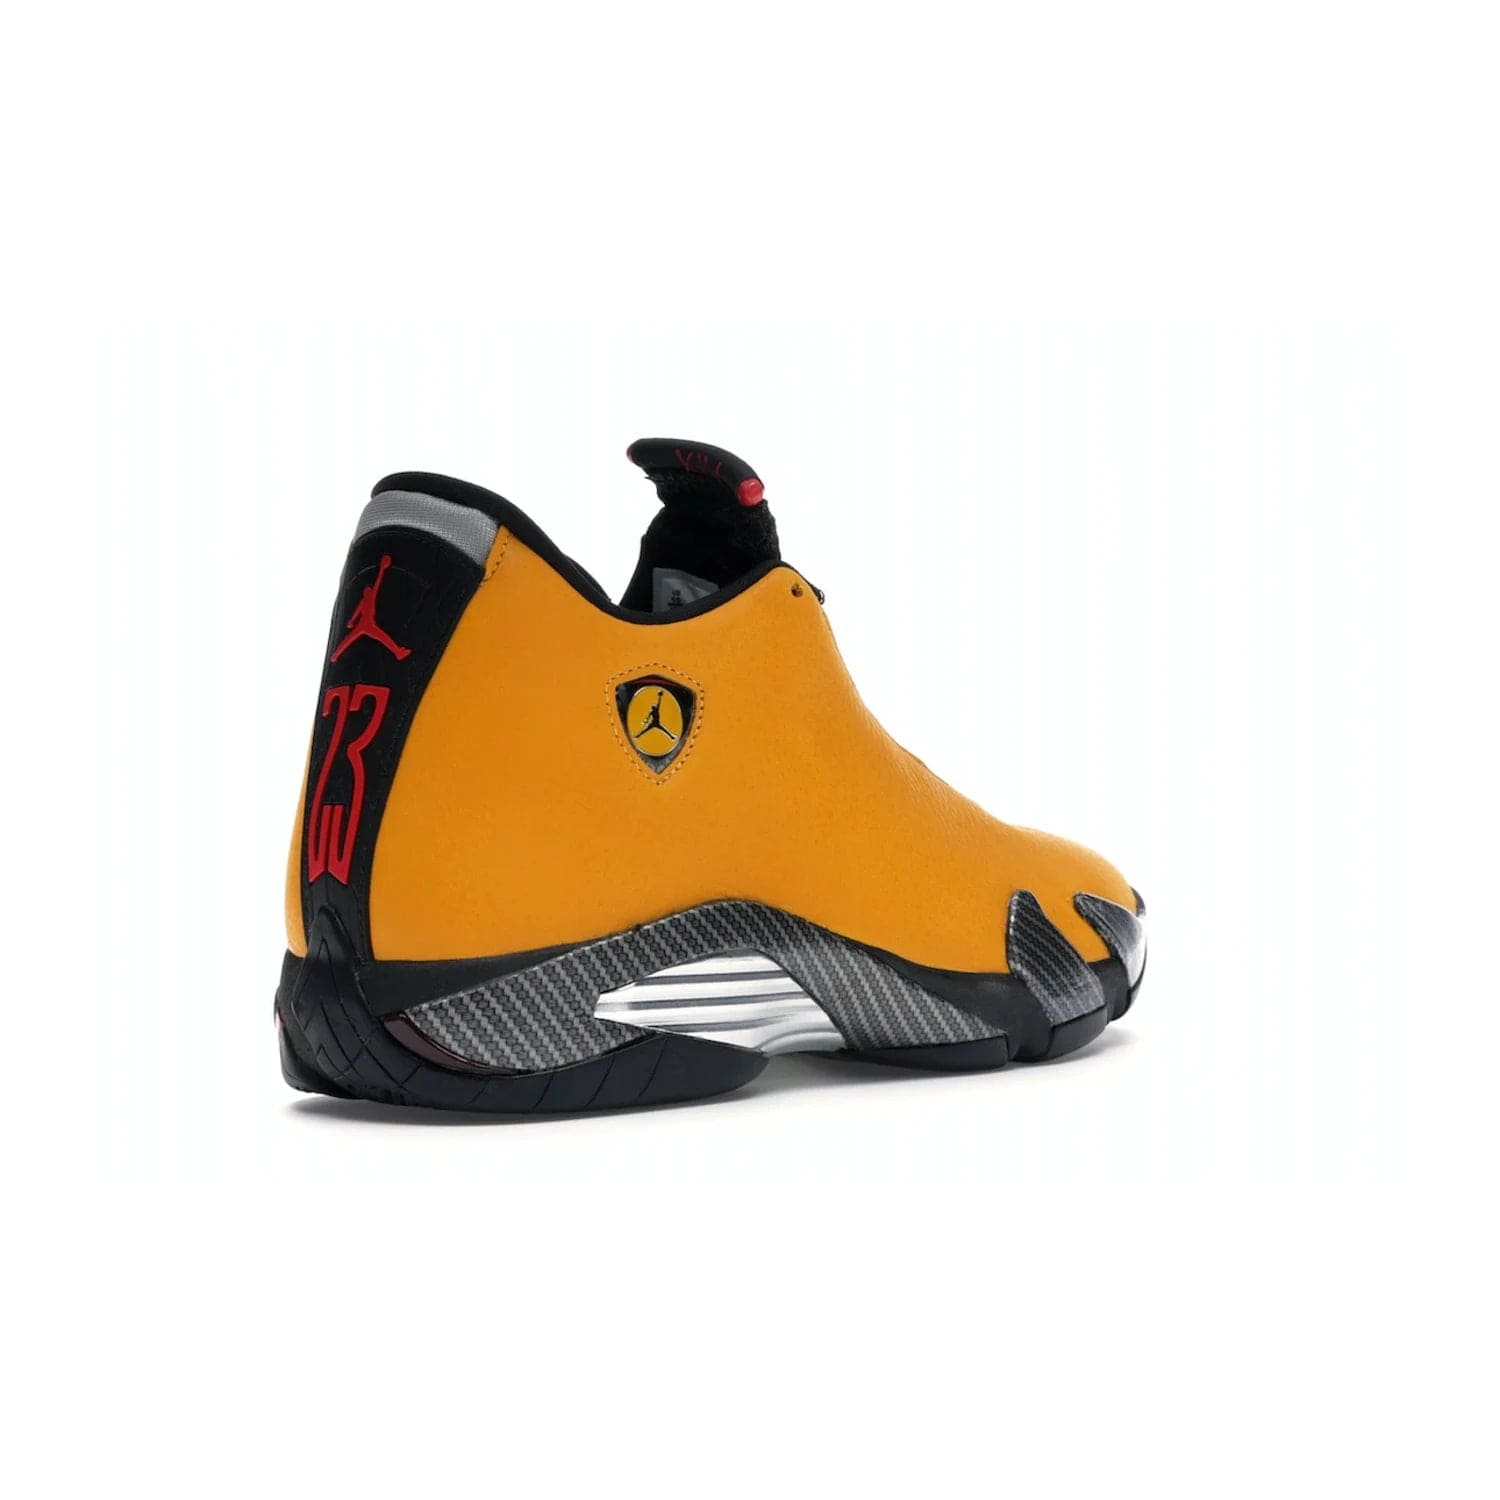 Jordan 14 Retro University Gold - Image 32 - Only at www.BallersClubKickz.com - Air Jordan 14 Retro University Gold: High-quality leather sneaker with Jumpman, tongue & heel logos. Zoom Air units & herringbone traction for superior comfort. University Gold outsole for stylish streetwear.